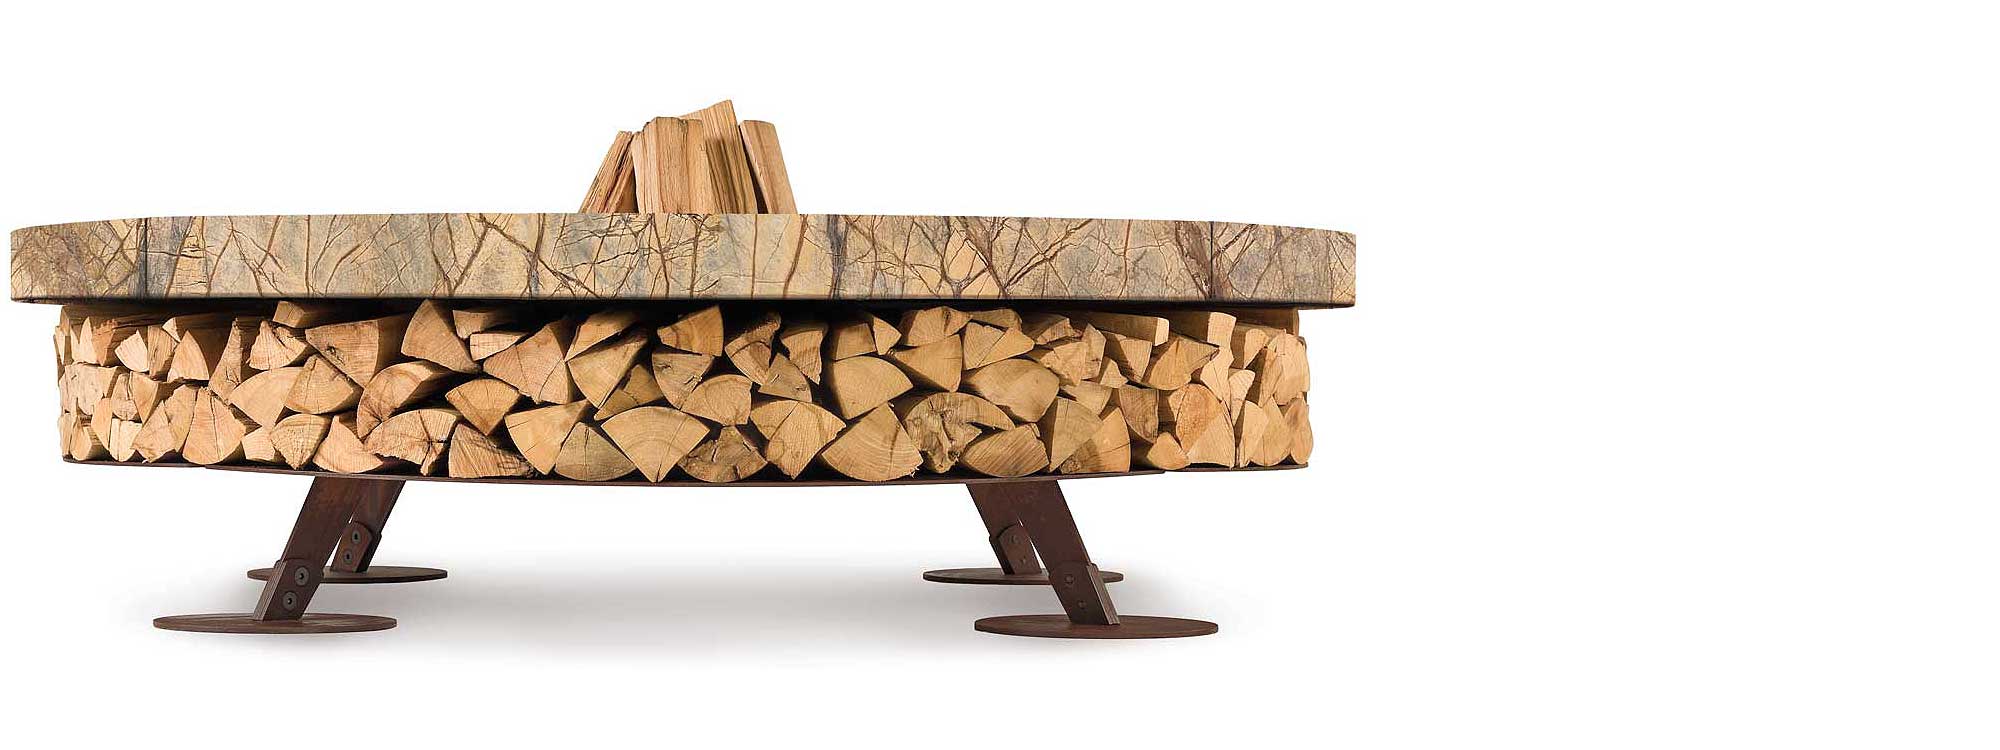 Image of side view of Ercole fire pit with rain forest brown marble surround and built-in log storage by AK47 Design